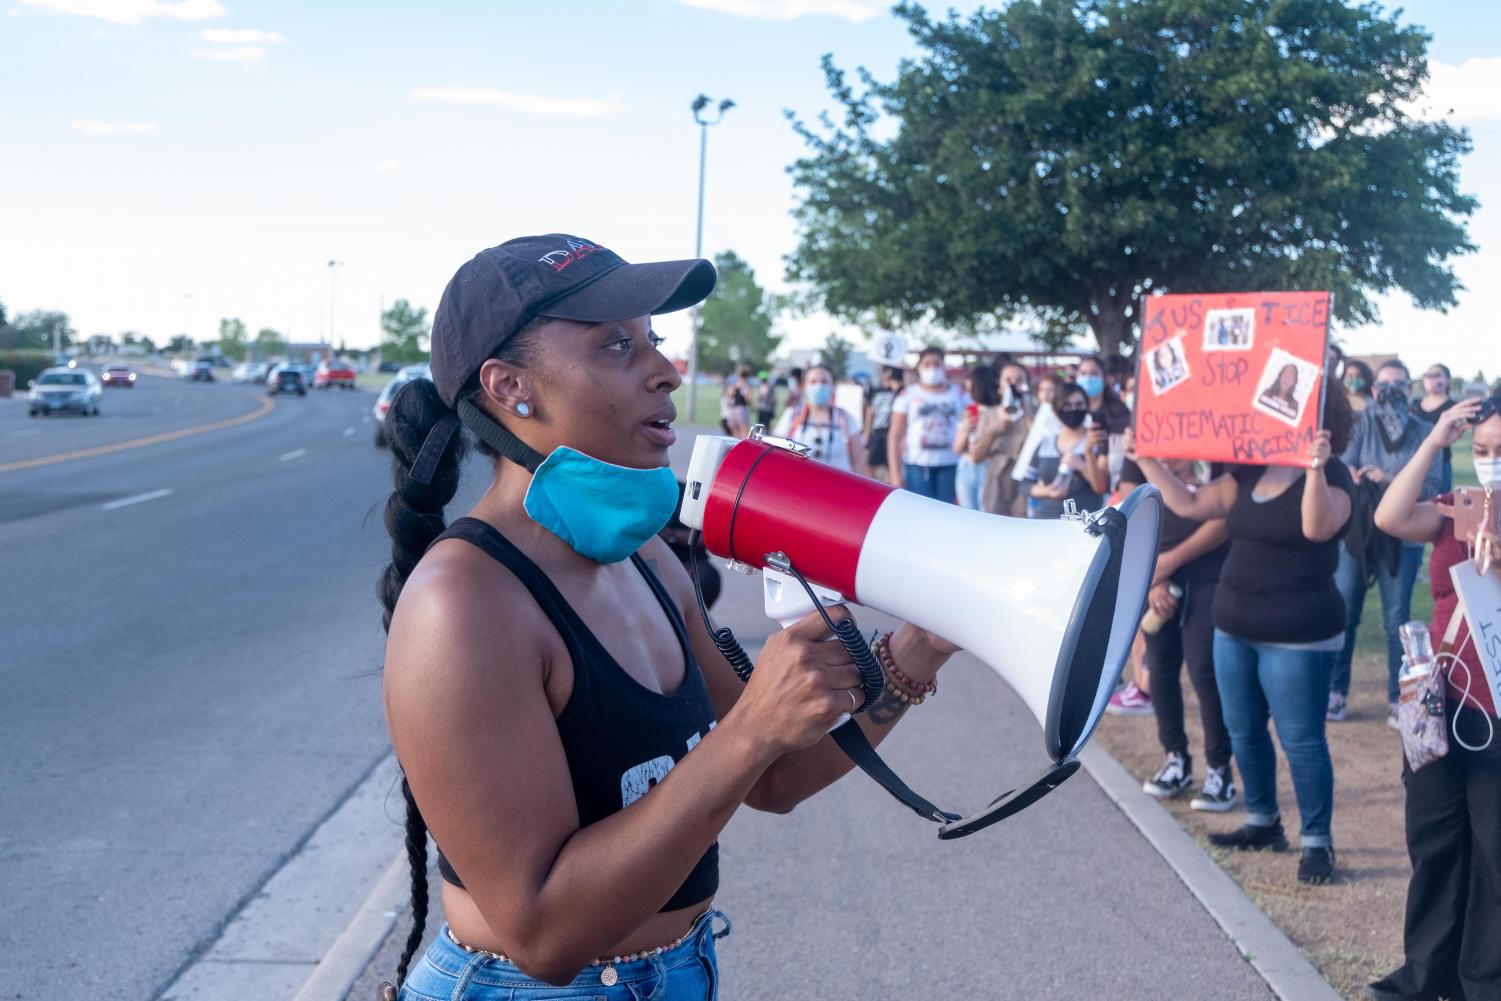 El+Paso+celebrates+Juneteenth+by+marching+for+racial+justice